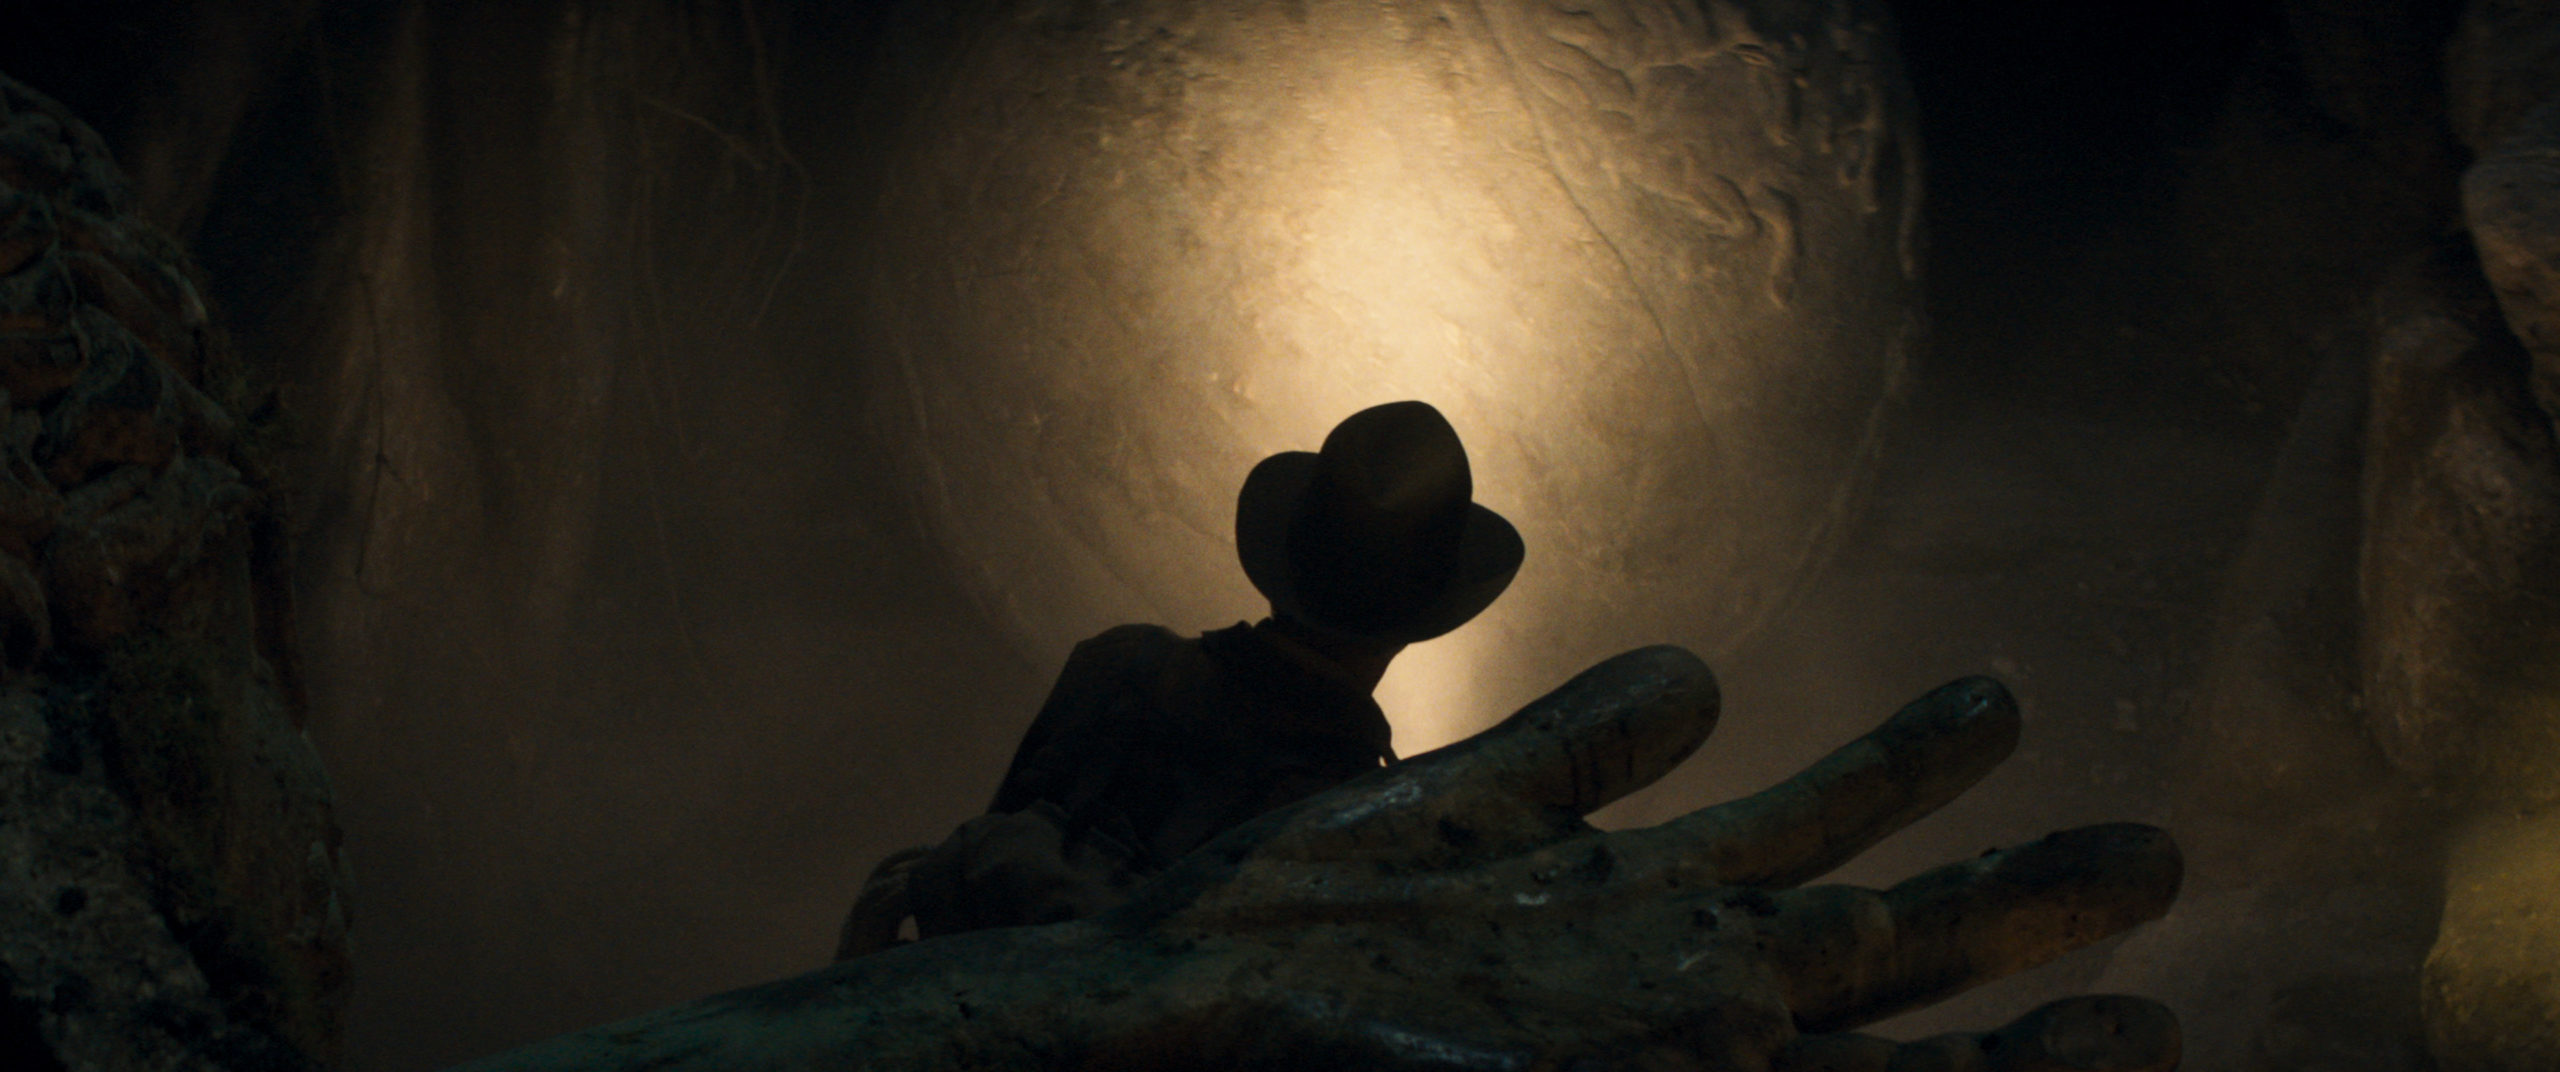 Indiana Jones And The Dial Of Destiny Trailer Puts Indy Front And Center